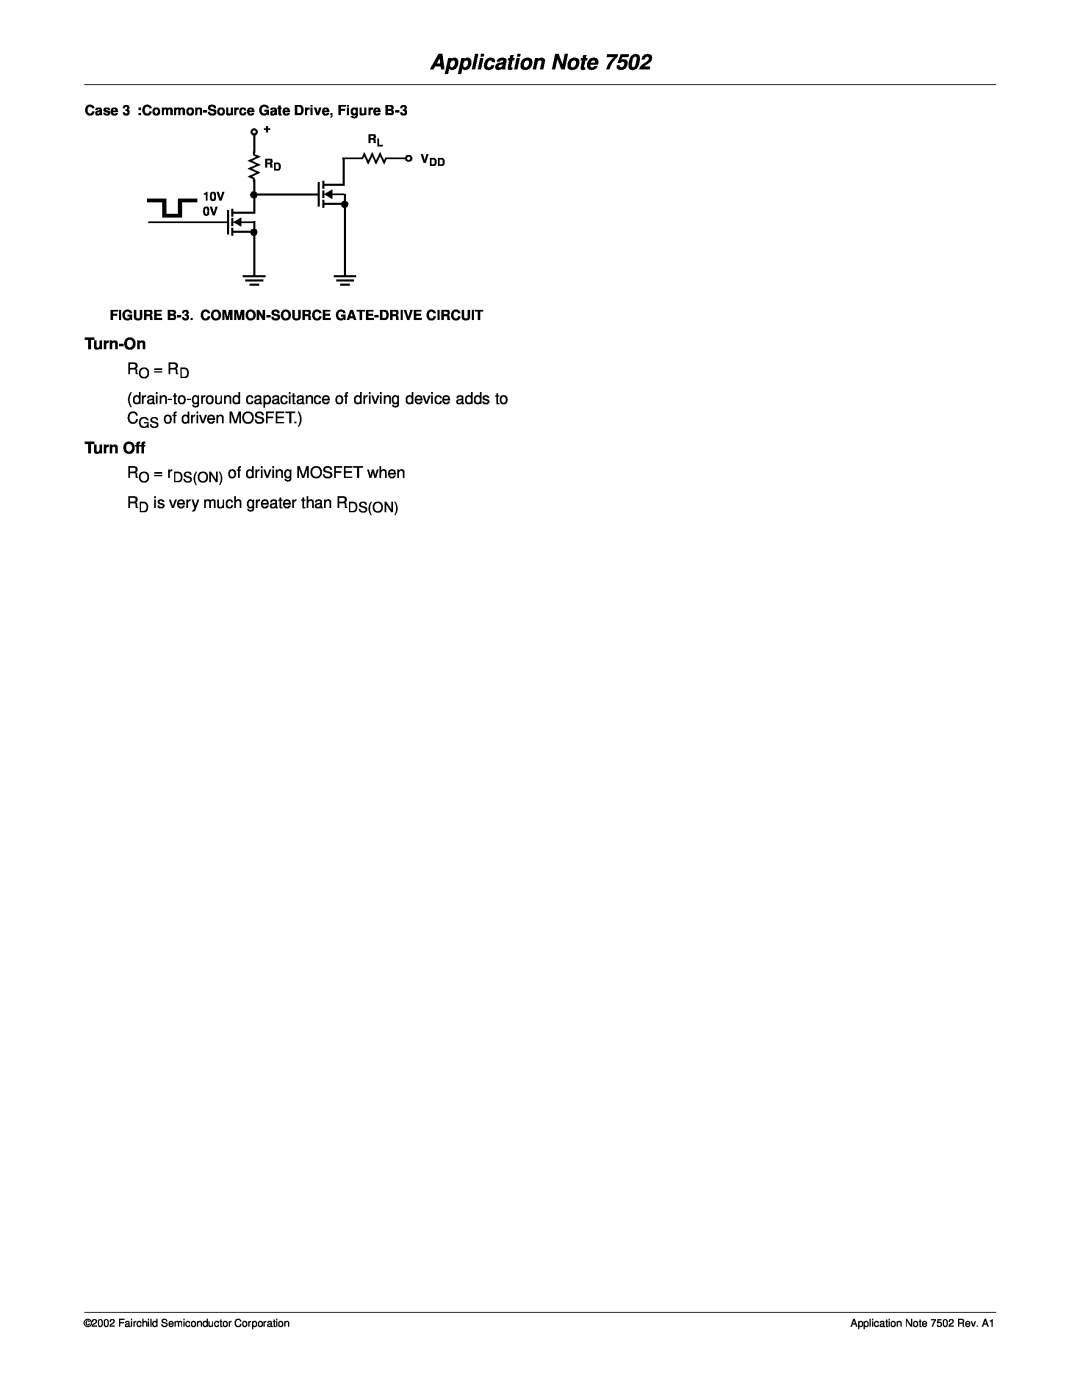 Fairchild AN-7502 manual Application Note, Turn-On, Turn Off, Case 3 Common-Source Gate Drive, Figure B-3 